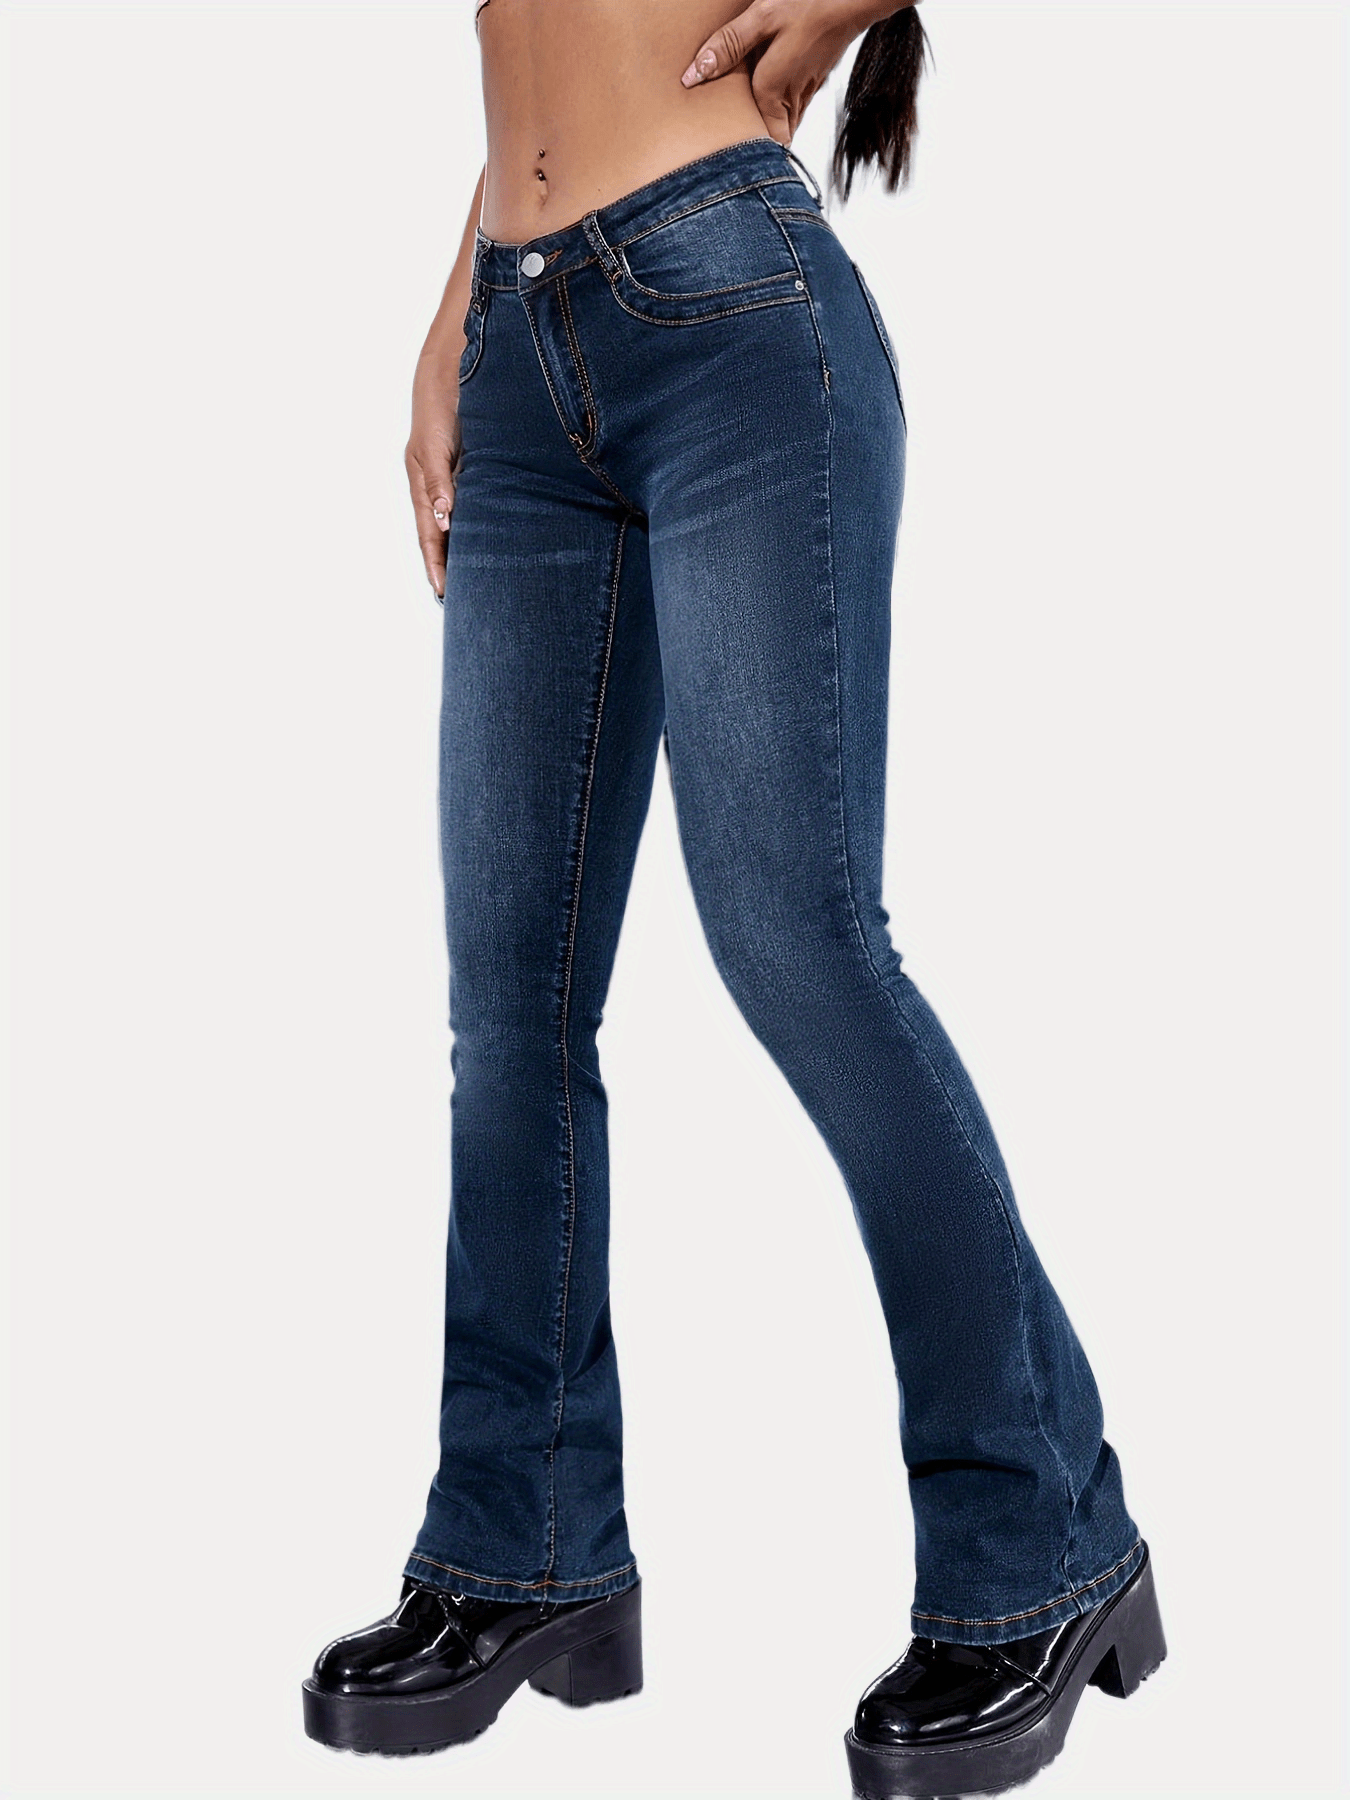 「lovevop」High Rise Solid Color Boot-Cut Jeans, High Waist Wide Leg Slim Fit Bell Bottom Flare Jeans, Y2K Women's Denim Jeans & Clothing